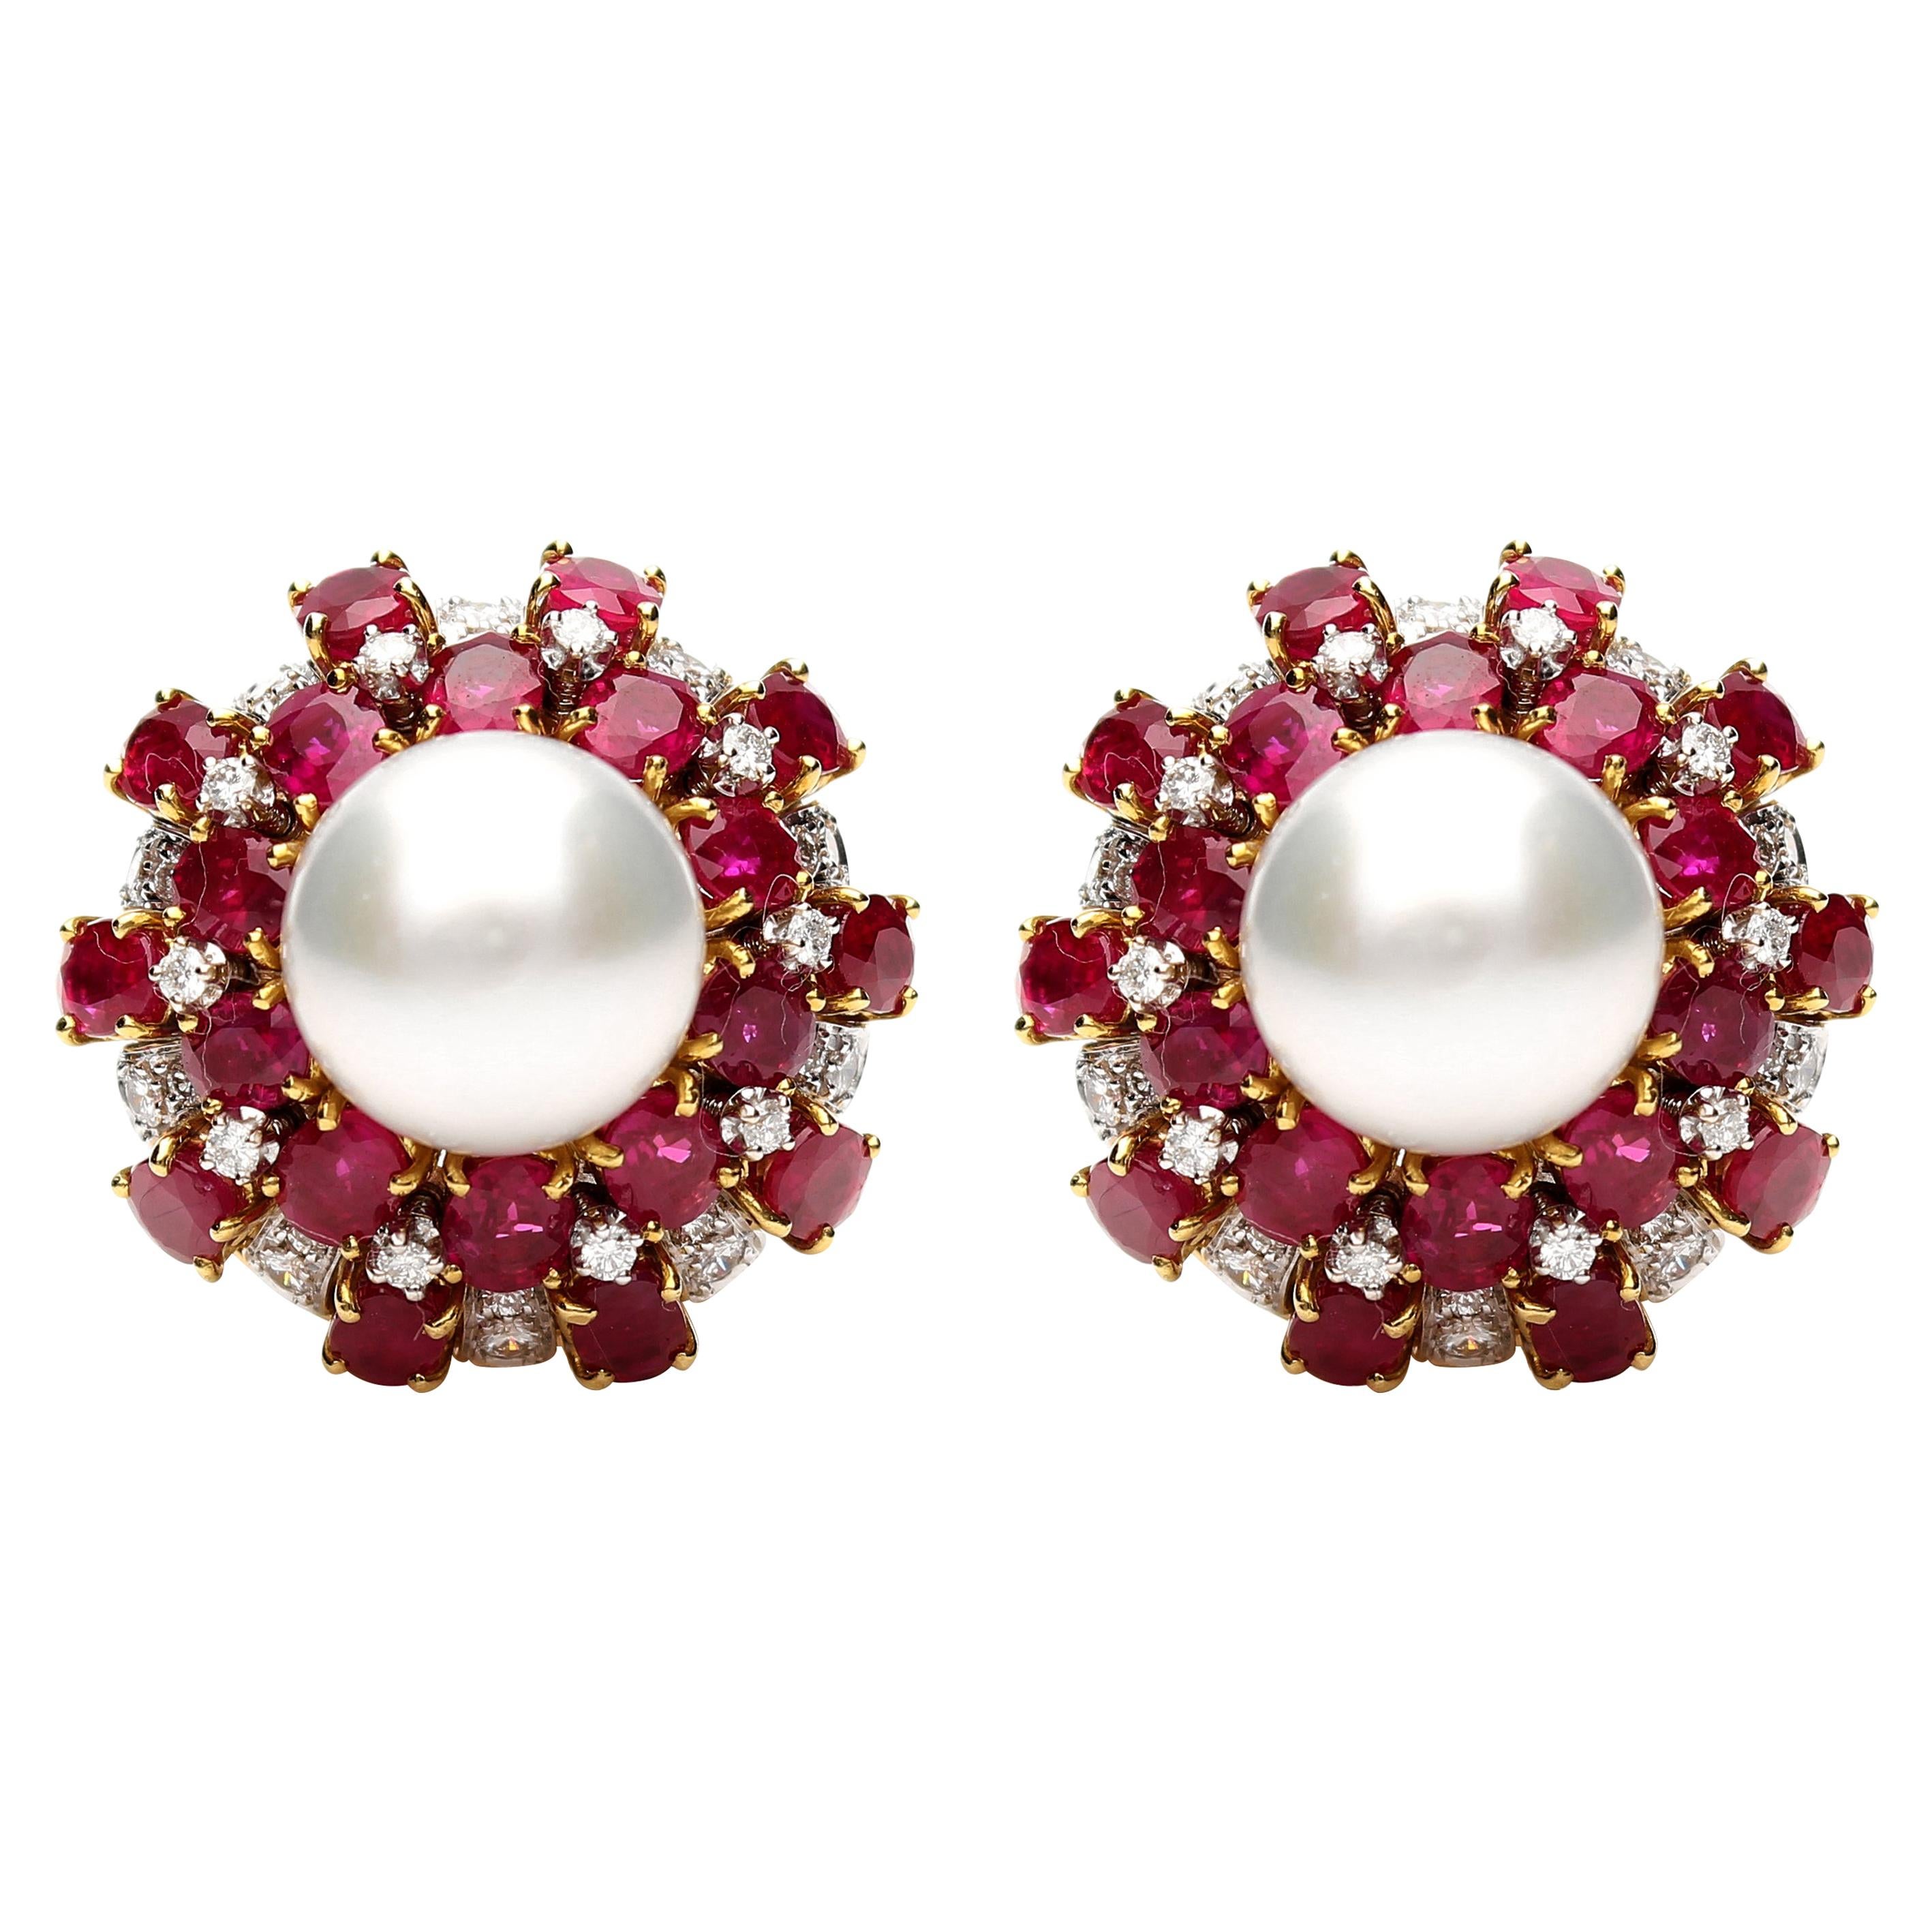 18 Karat Yellow Gold Earrings with Oval Cut Rubies, Diamonds and Pearls